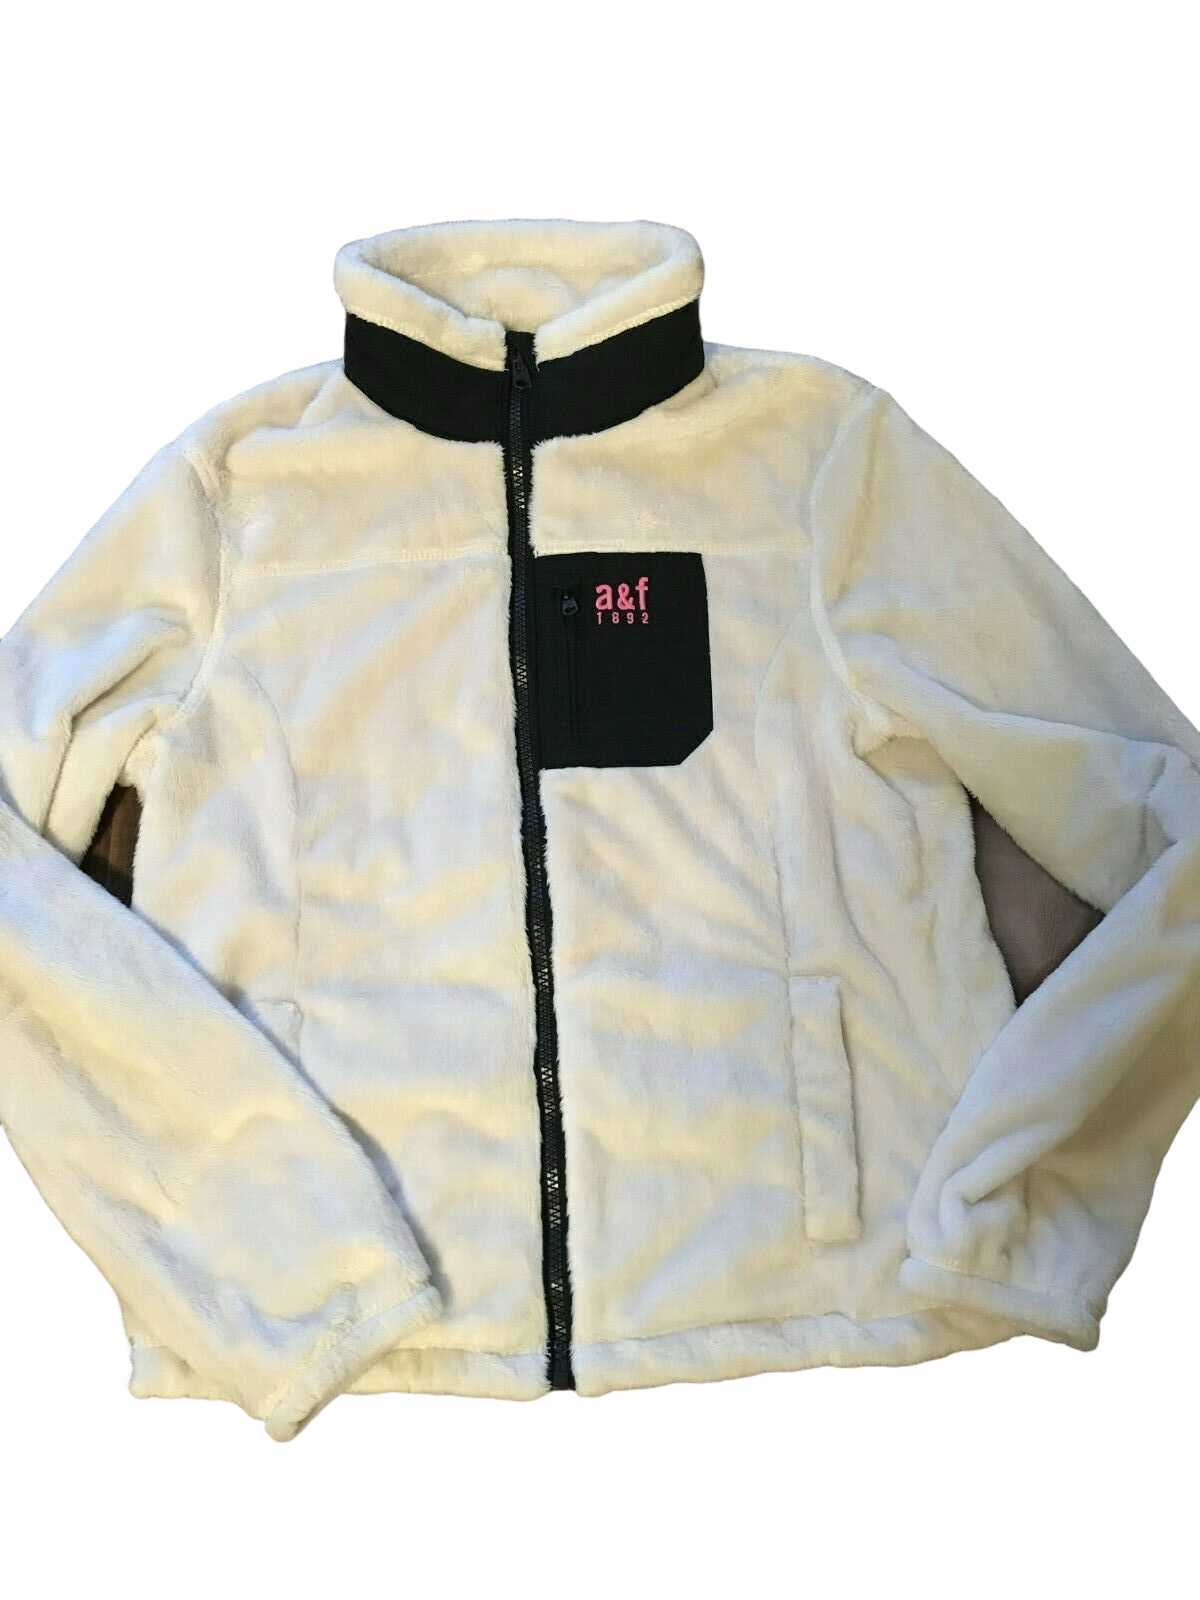 A&F Abercrombie and Fitch Kids Girls Cozy Fleece Full Zip Jacket Size XL  White.